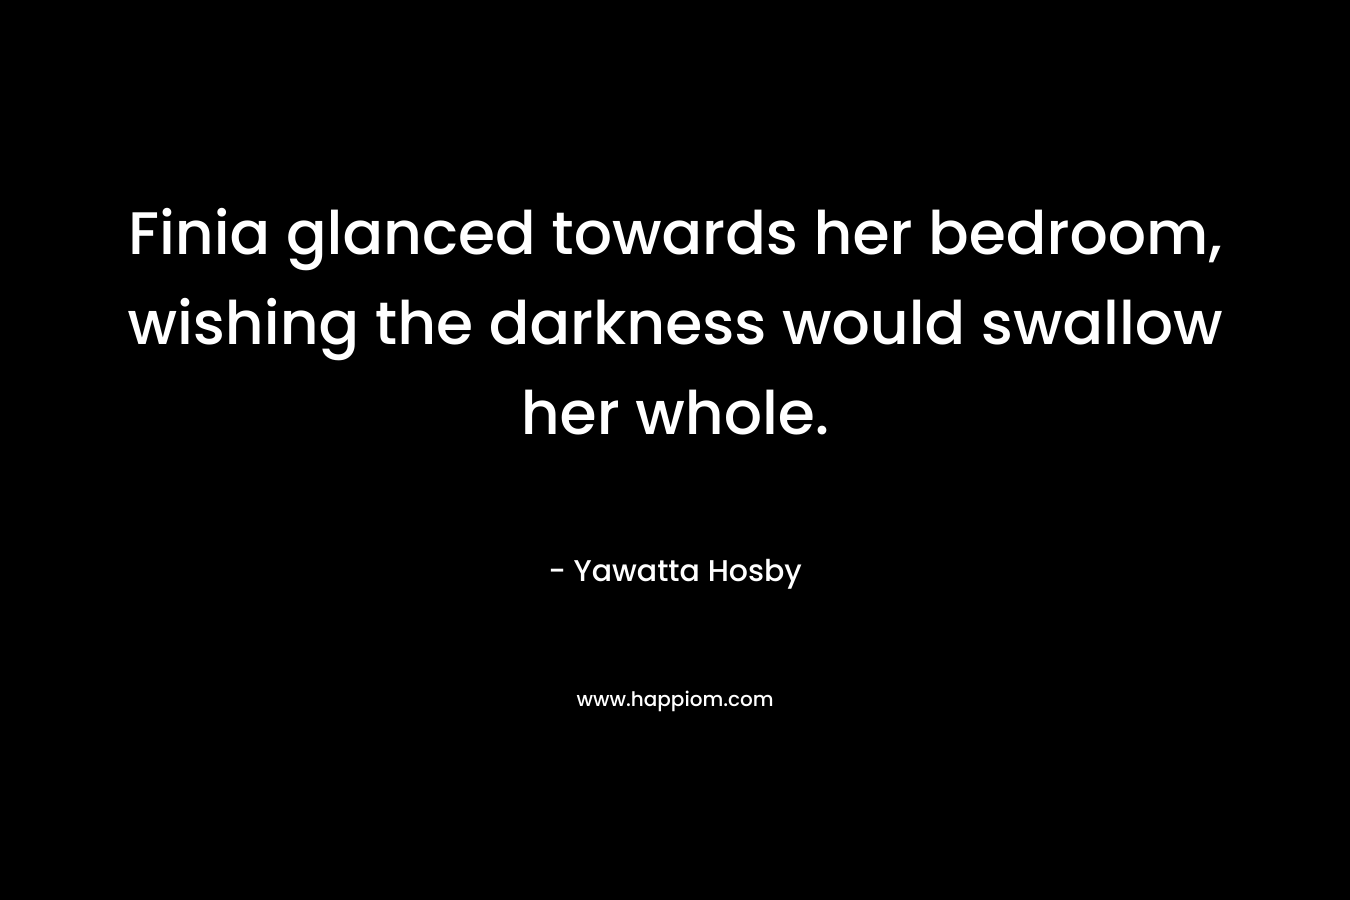 Finia glanced towards her bedroom, wishing the darkness would swallow her whole. – Yawatta Hosby